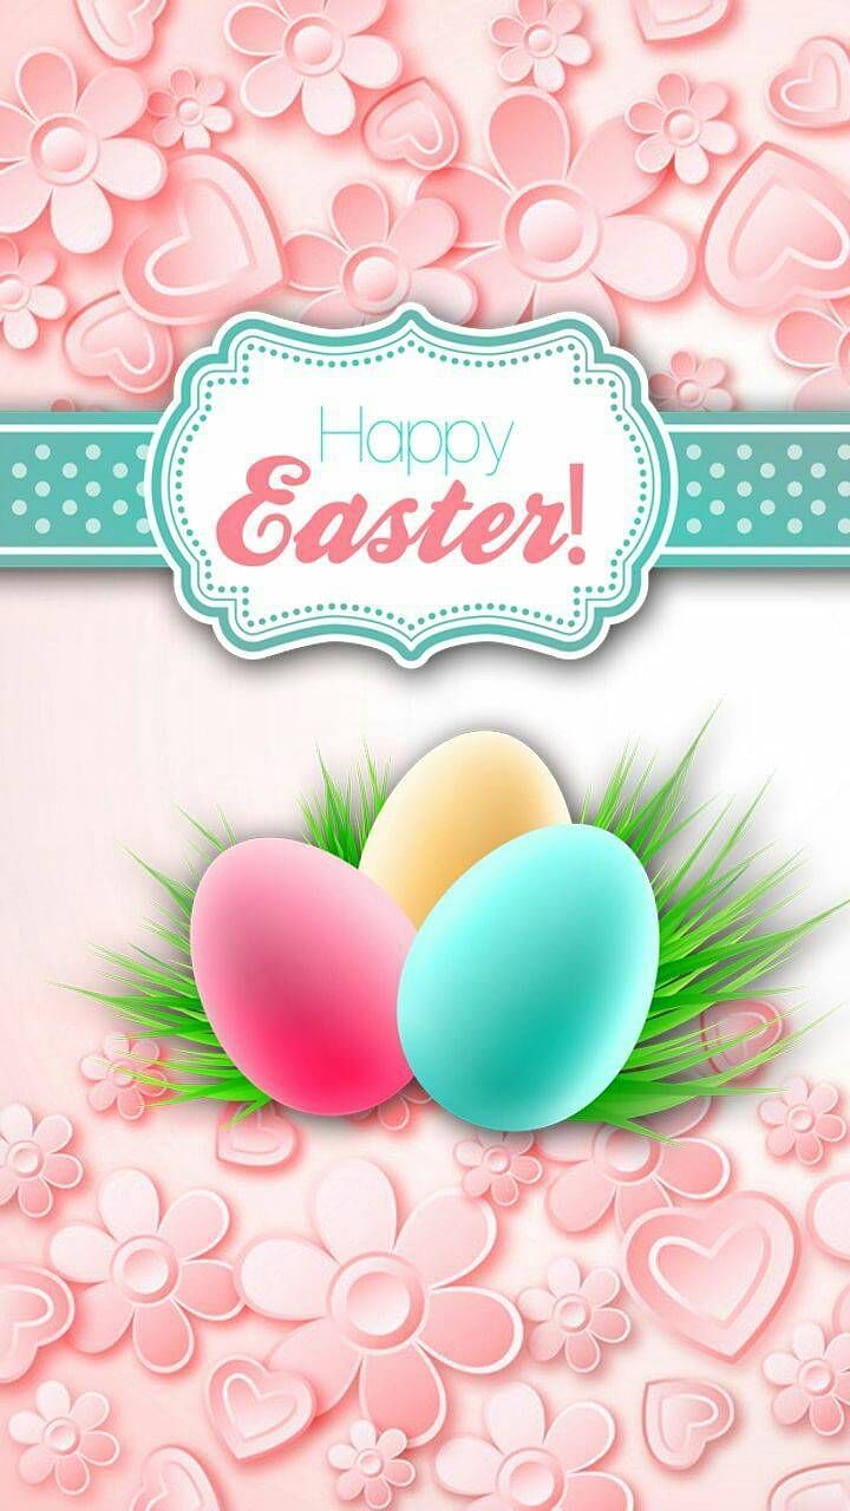 25 Cute Easter Backgrounds For Iphone in 2021, 2021 easter HD phone wallpaper